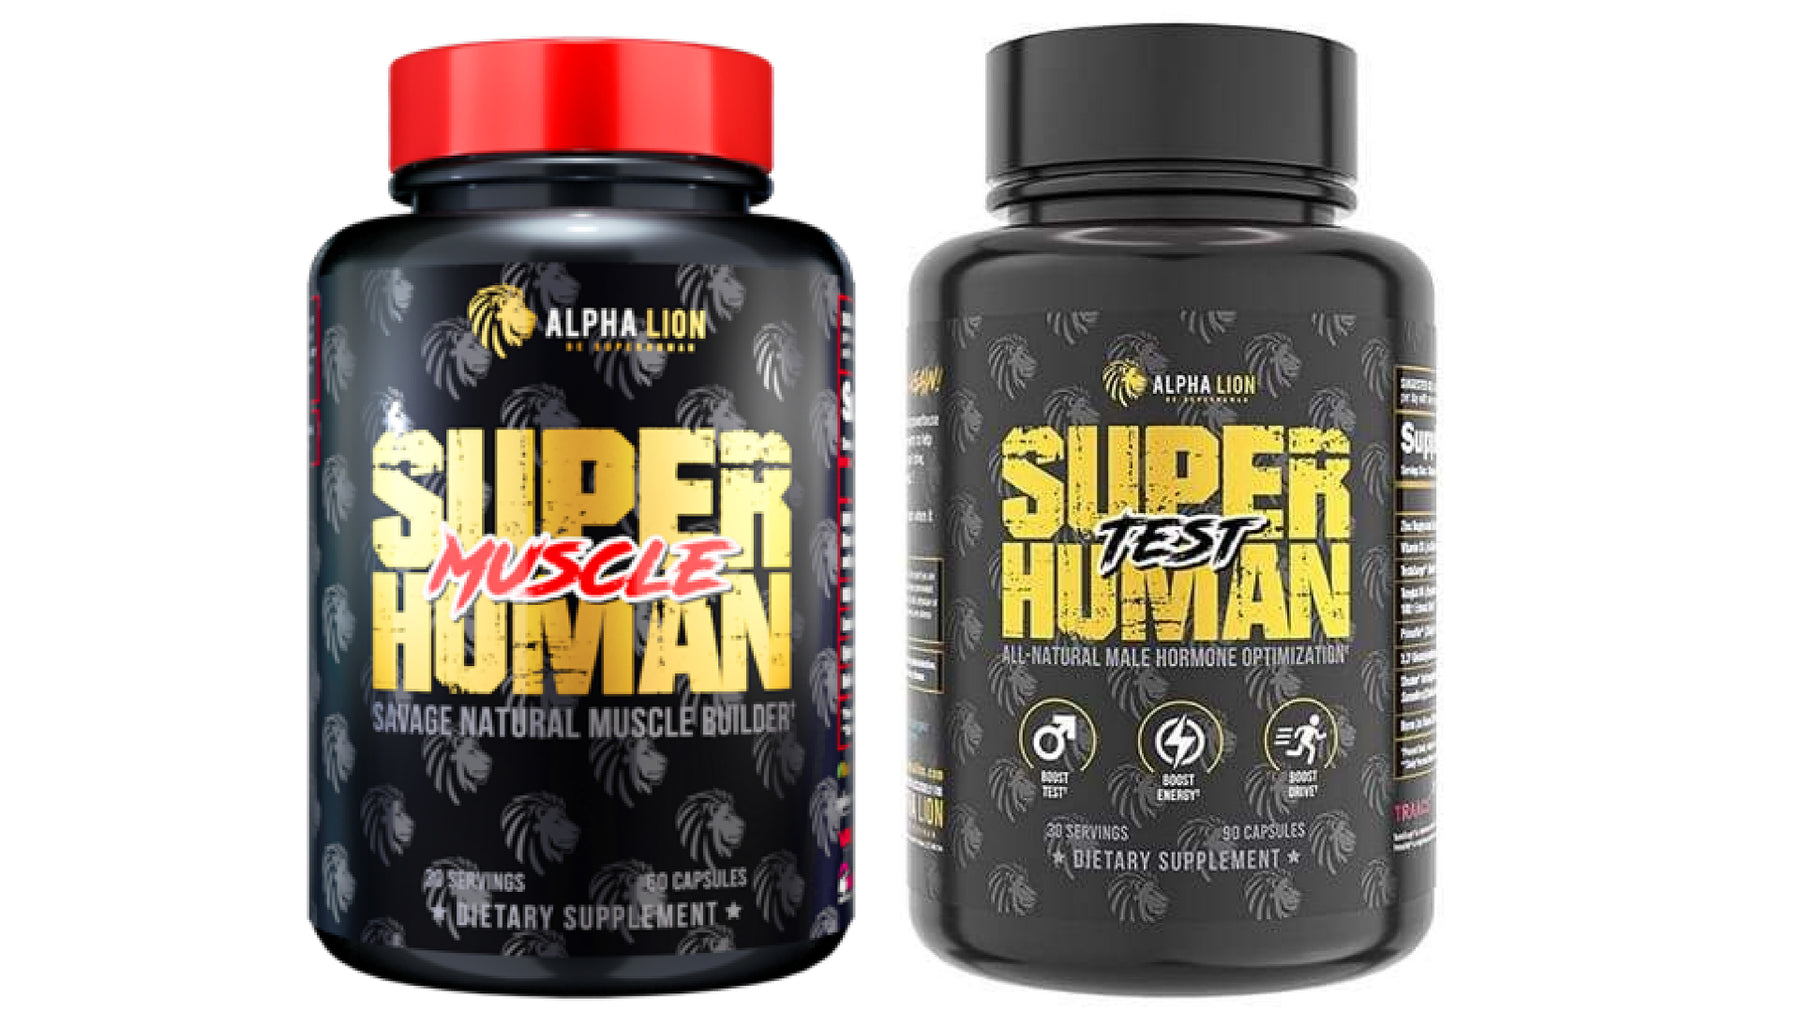 Alpha Lion - The Beast Mode Stack For Him!